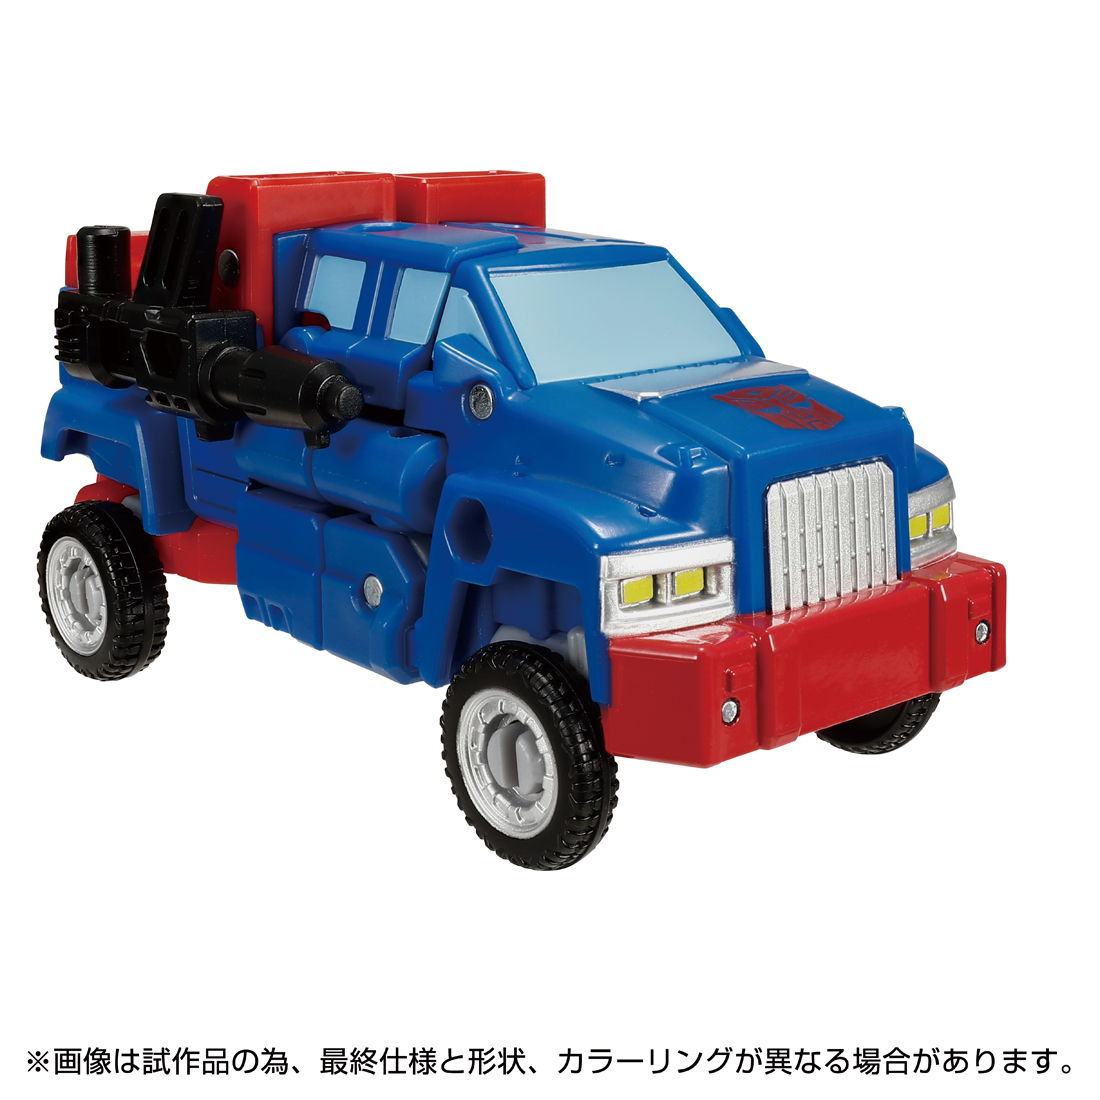  Takara Tommy Transformer TL-75 auto boto Gears returned goods kind another B